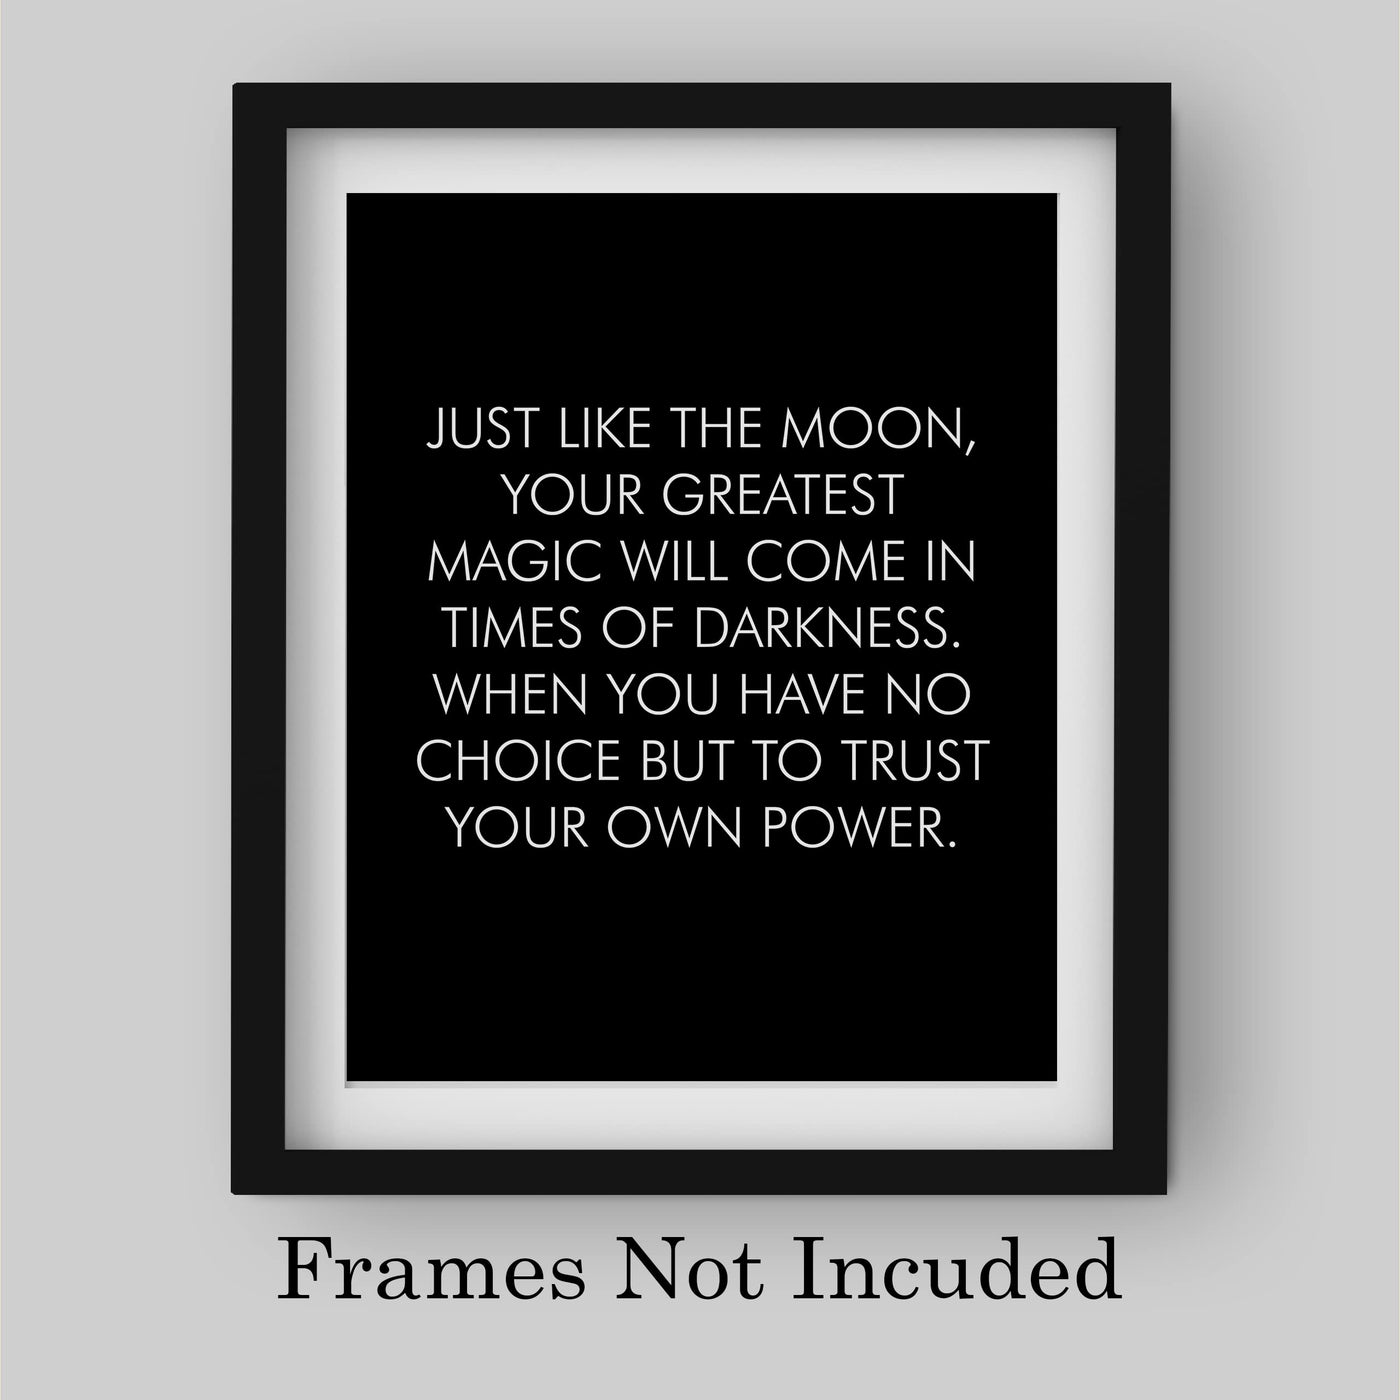 Your Greatest Magic Comes in Times of Darkness-Inspirational Wall Decor Sign -8 x 10" Motivational Art Print -Ready to Frame. Modern Home-Office-School-Dorm Decor. Great Gift for Inspiration!